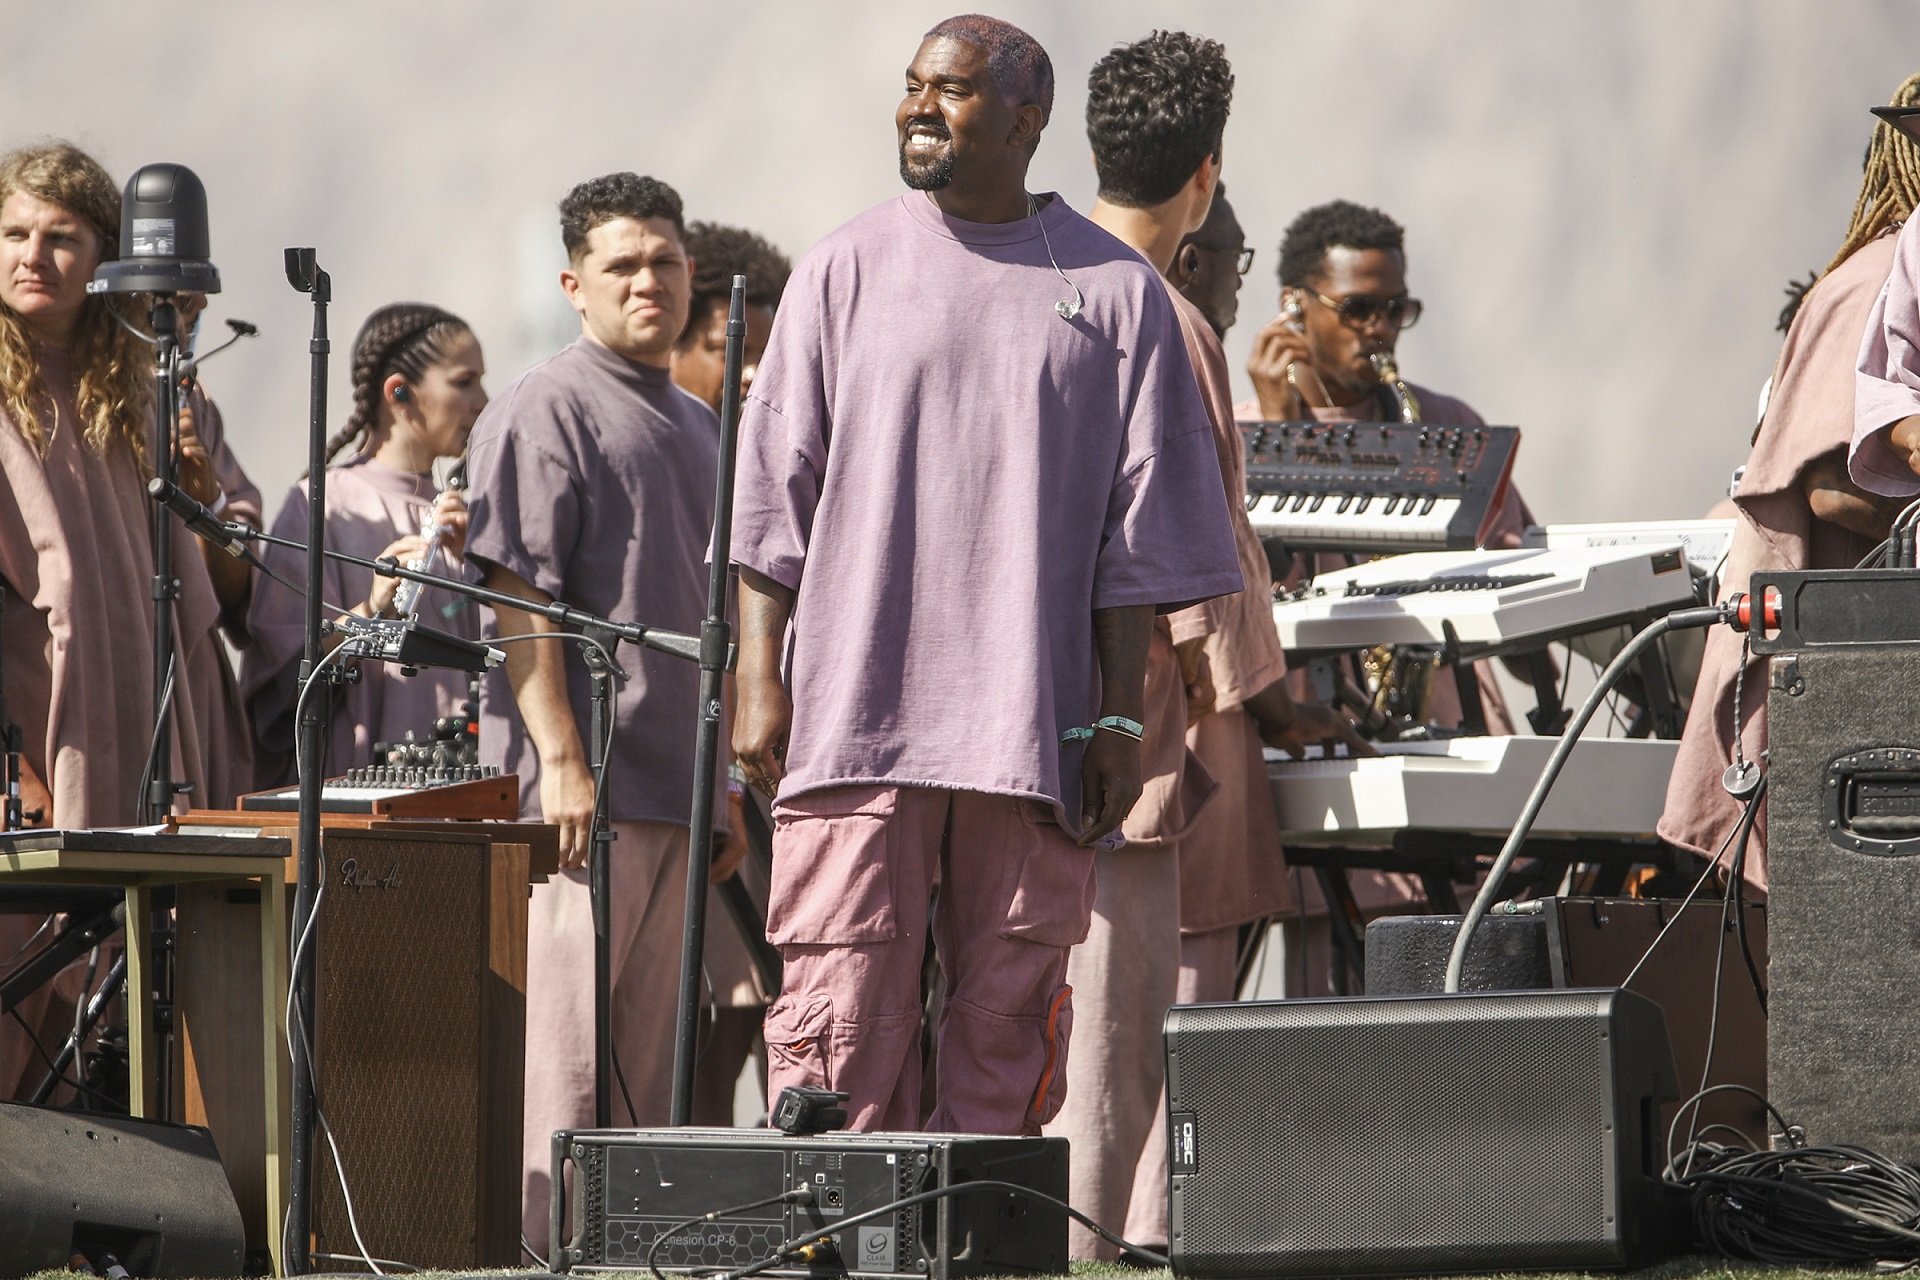 Kanye on stage at Coachella in our Kanye West net worth feature